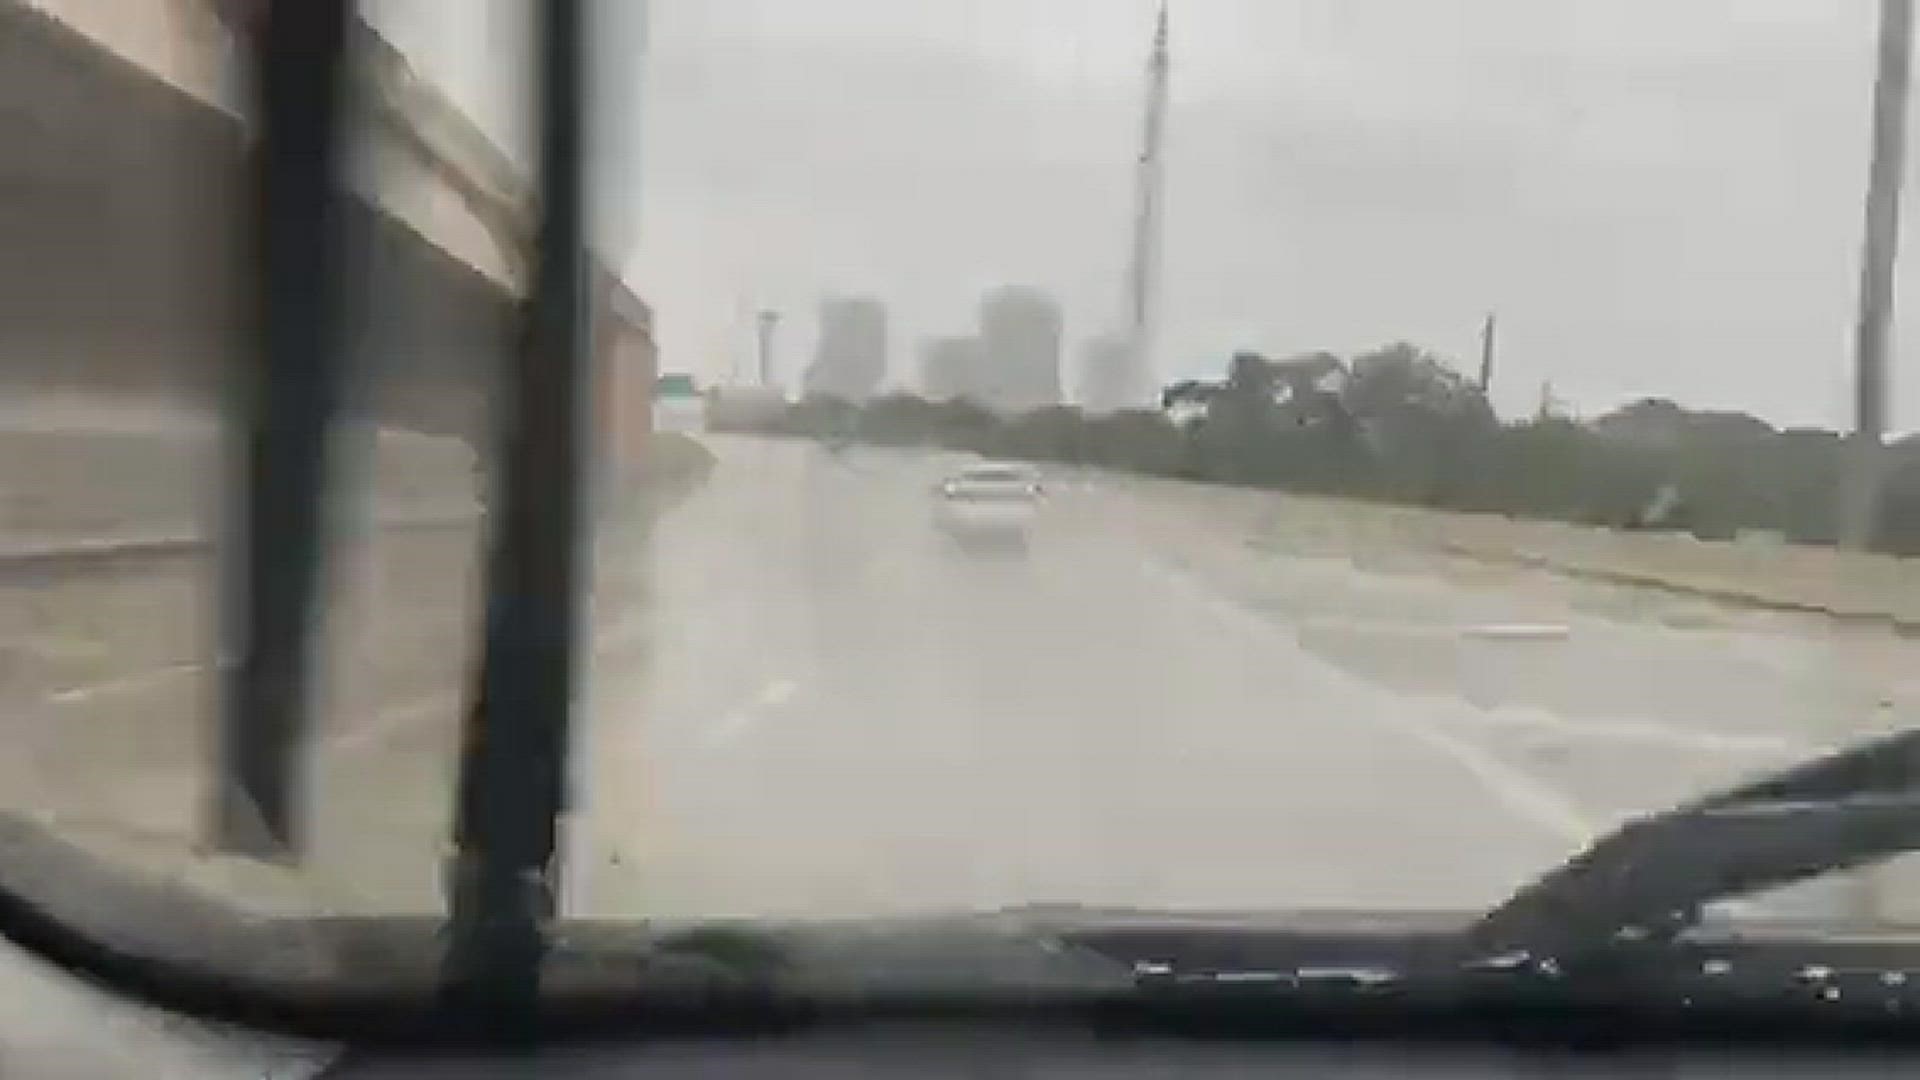 A time-lapse video shows the rainy conditions along the drive into Downtown Jacksonville via the Main Street Bridge.
Credit: anne schindler